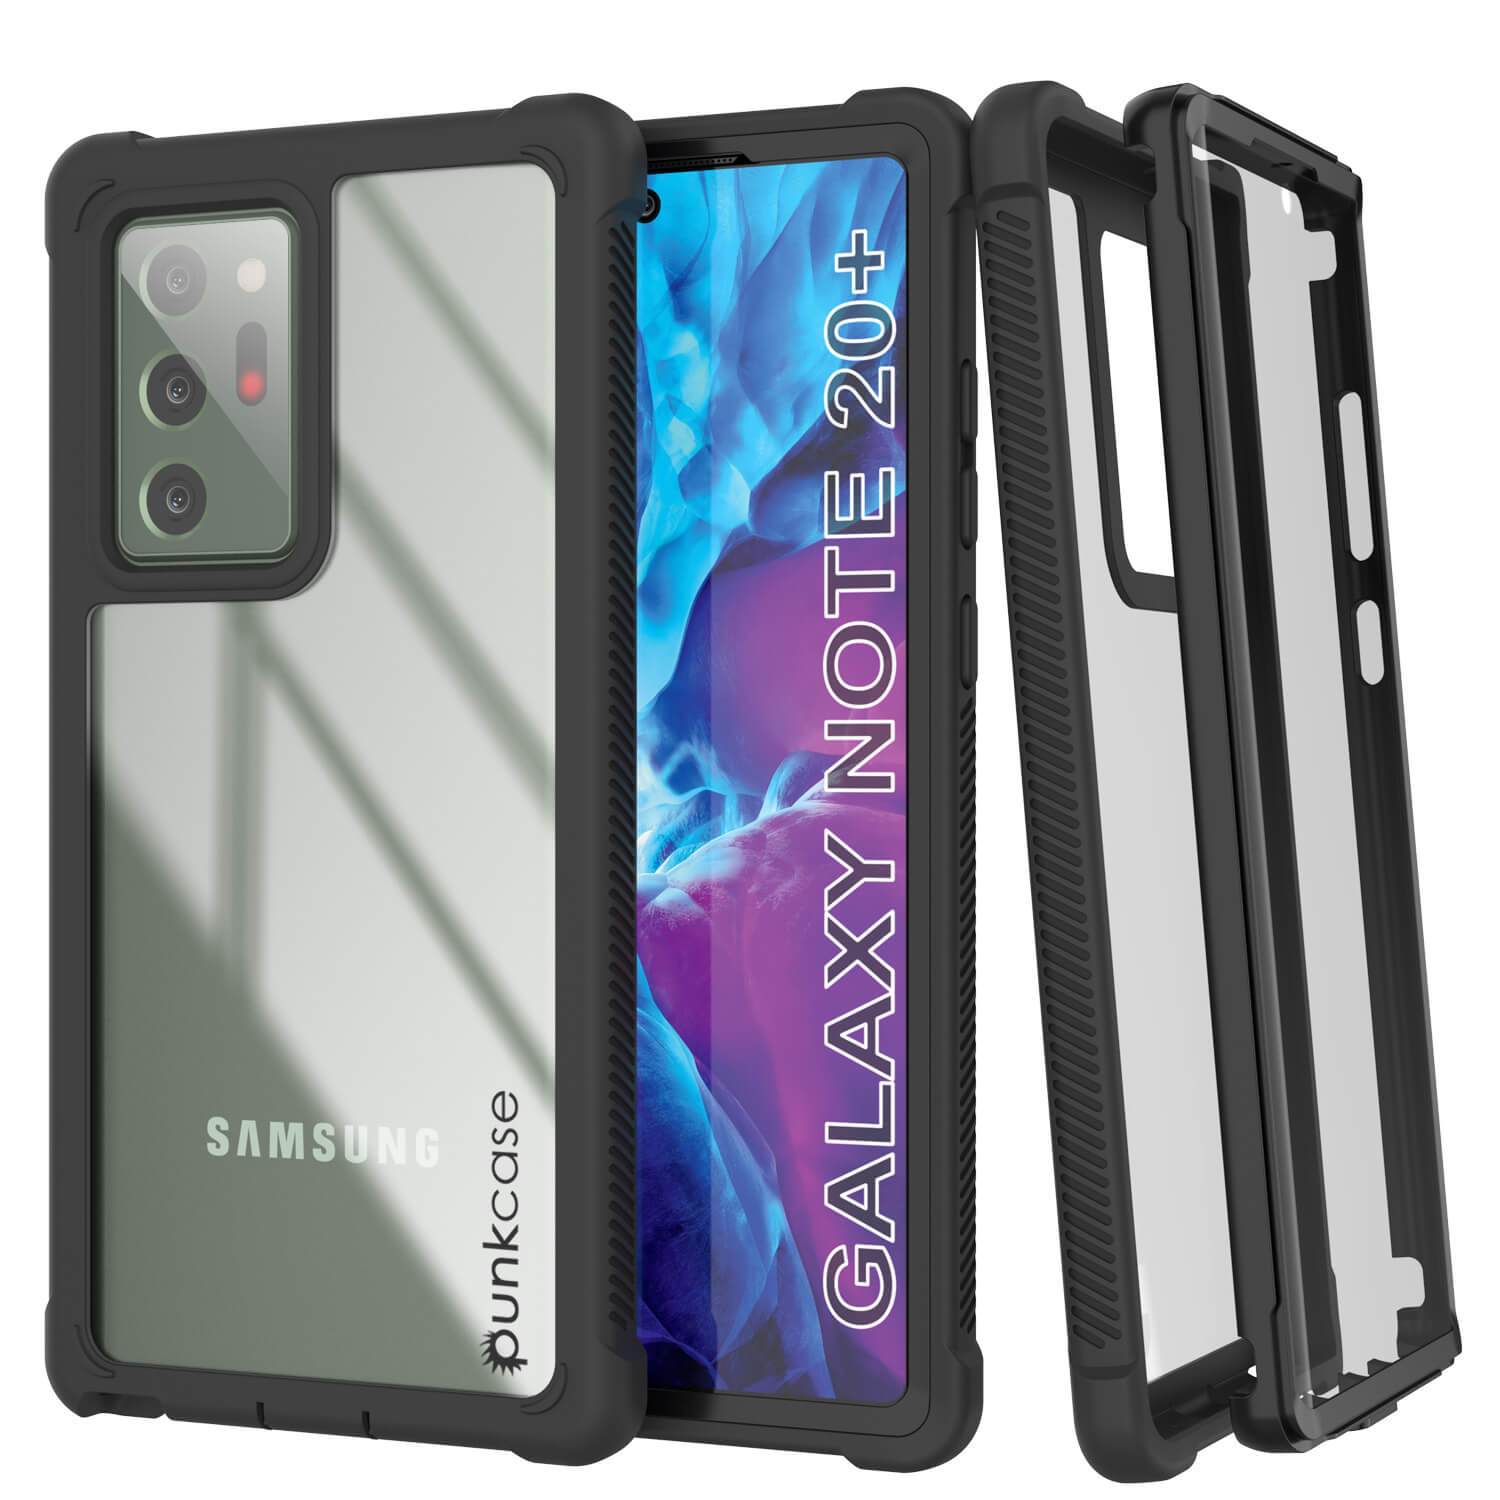 Galaxy Note 20 Ultra 6000mAH Battery Charger Slim Case [Black] – punkcase